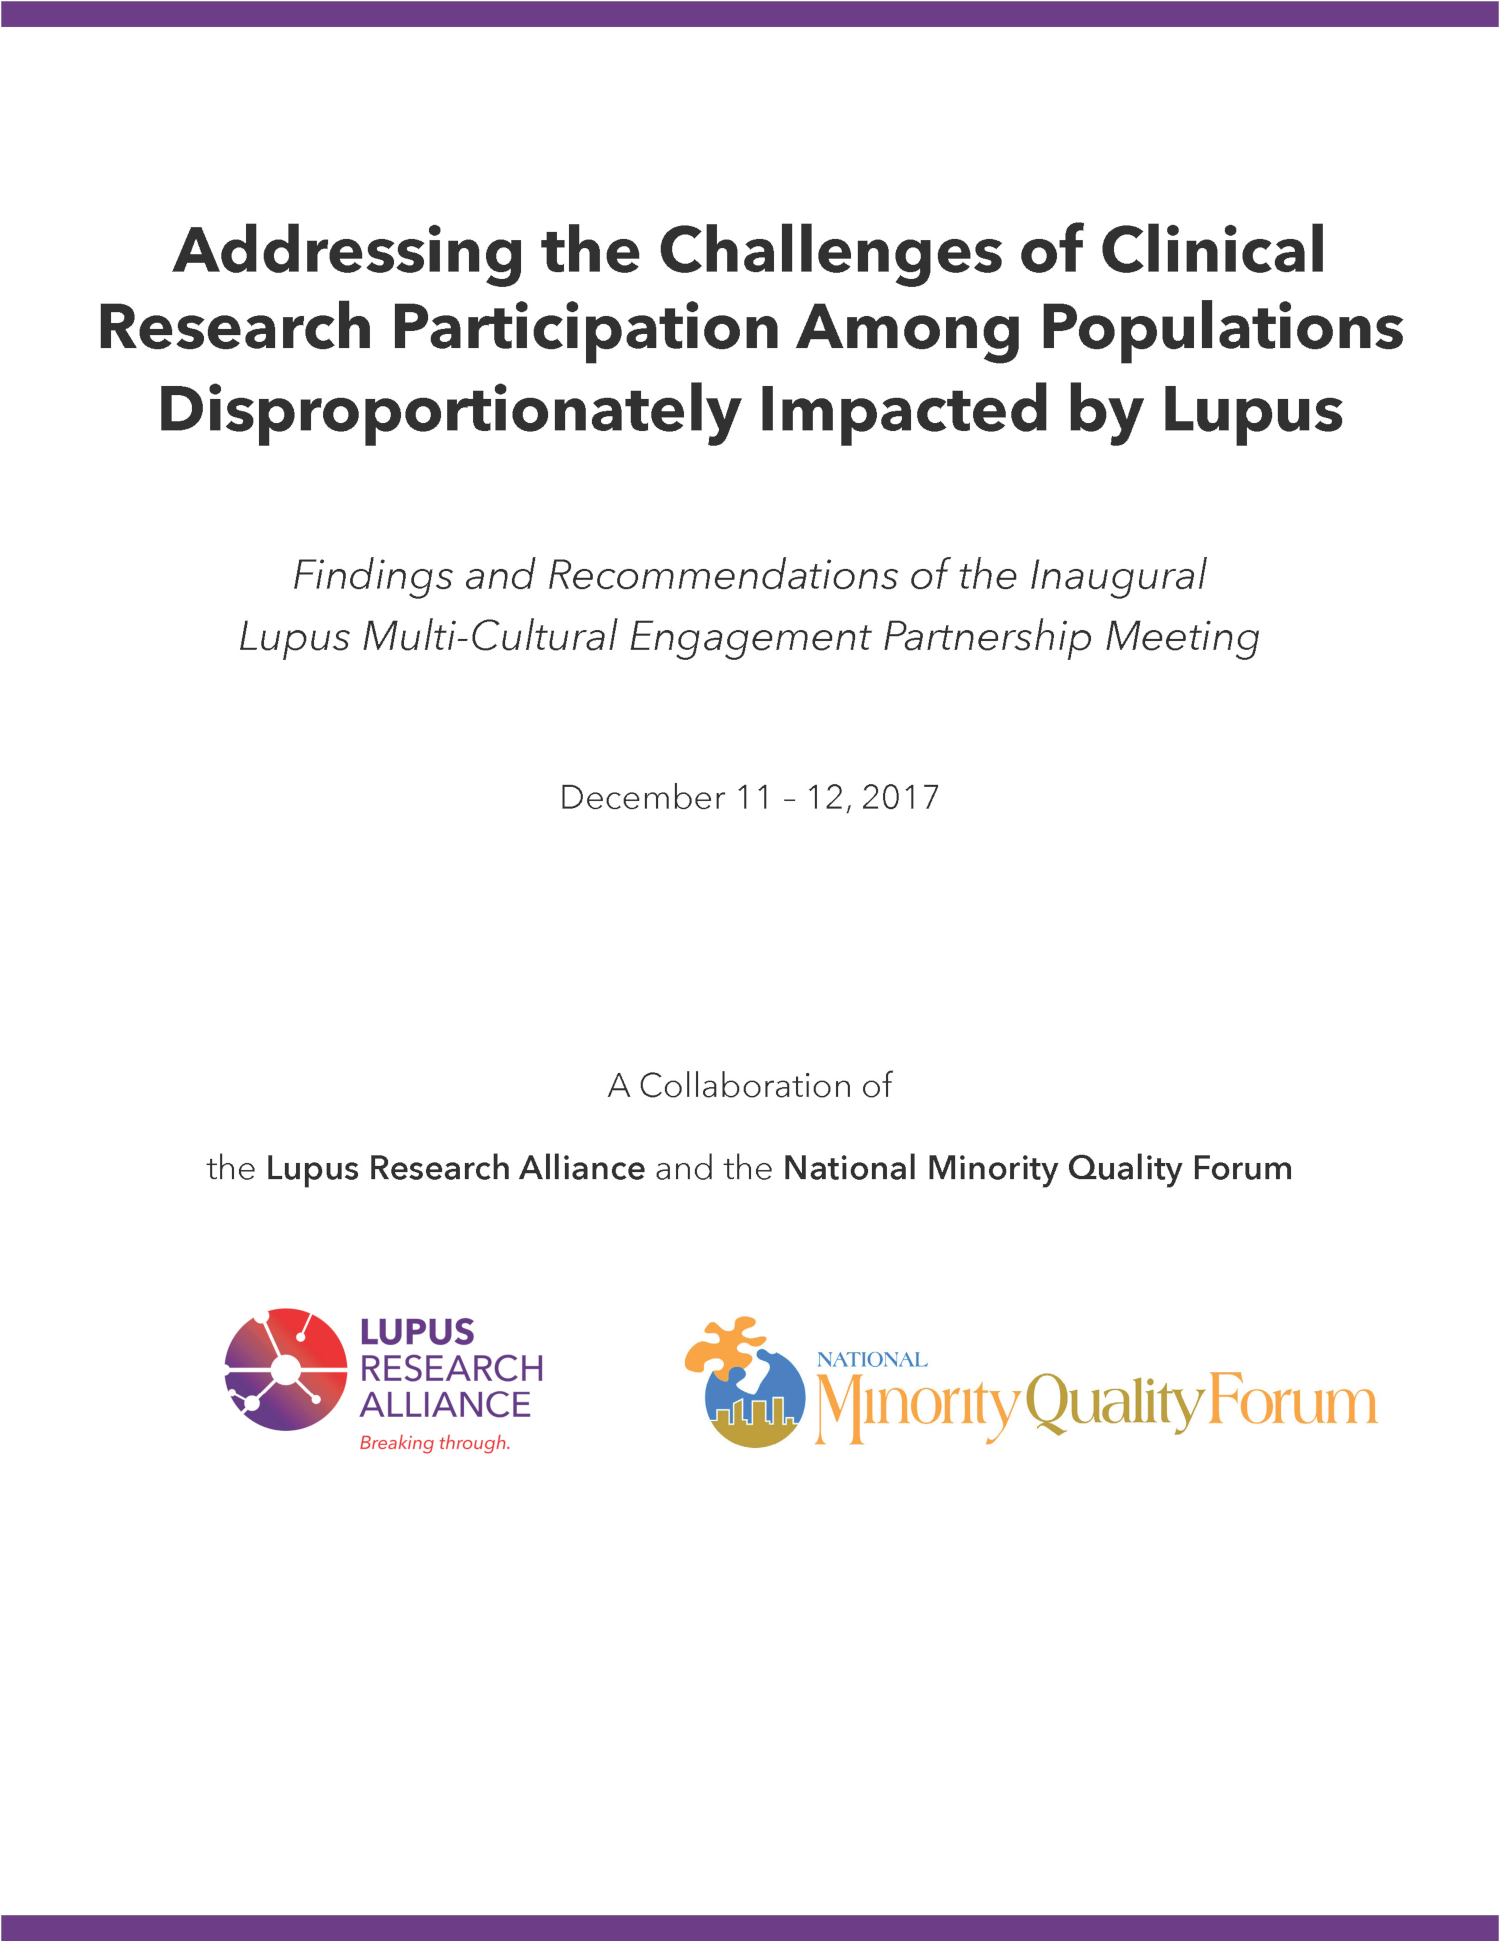 Addressing Lupus Research Challenges